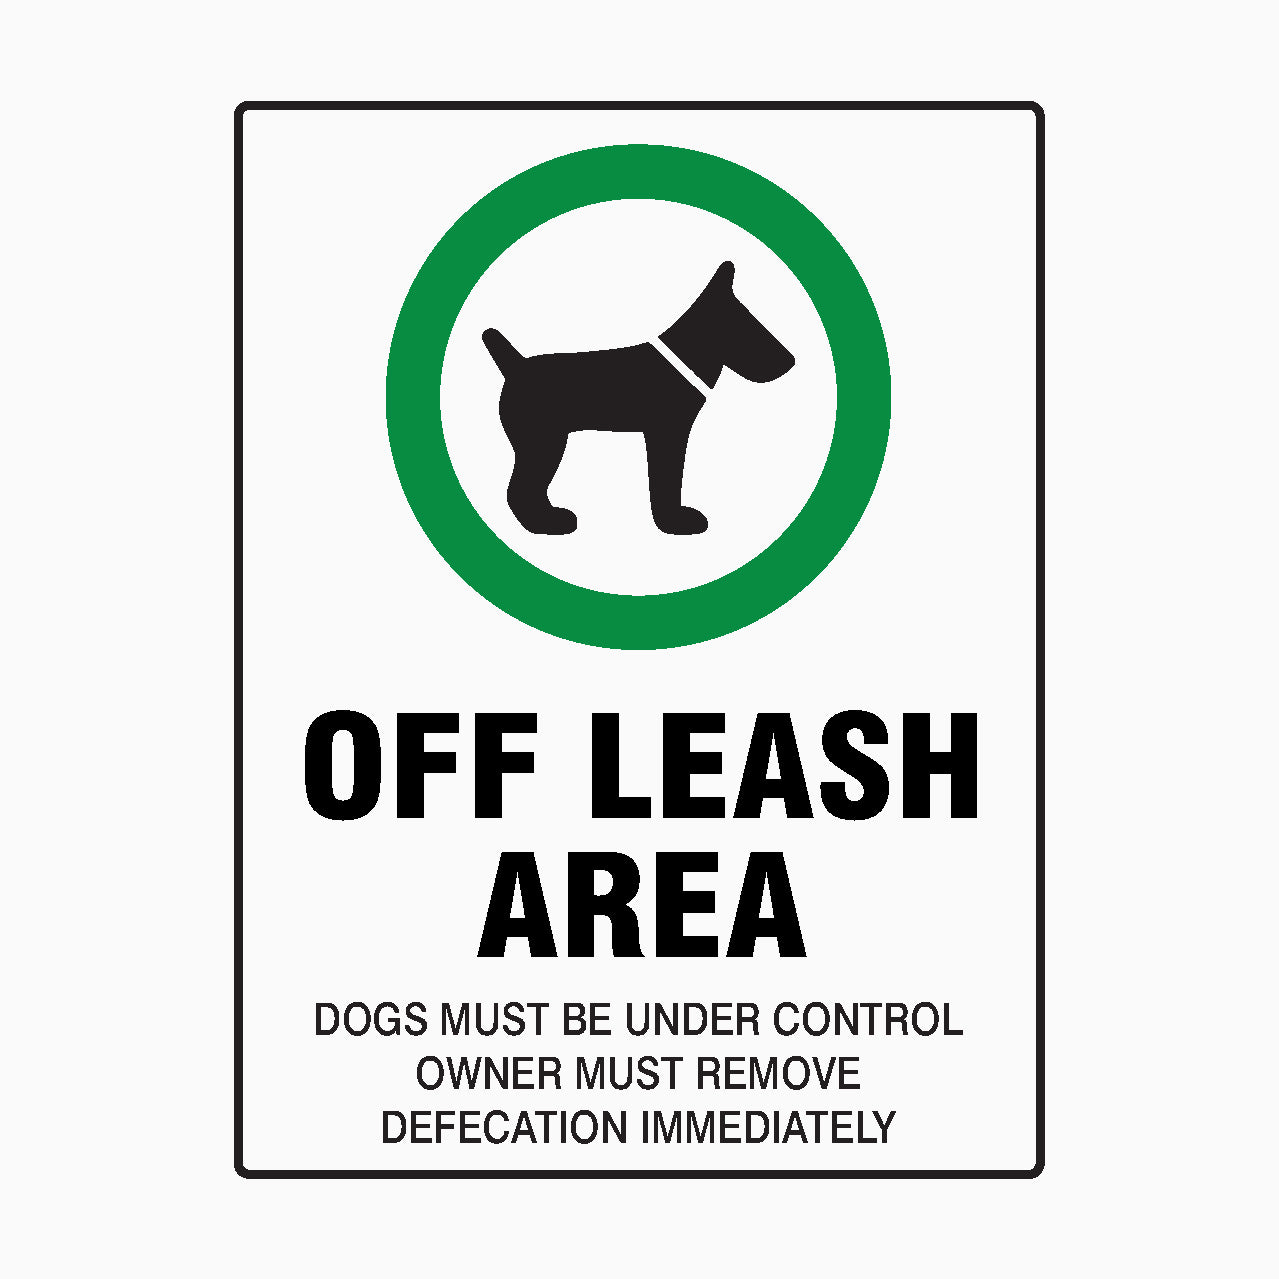 OFF LEASH AREA SIGN - DOGS MUST BE UNDER CONTROL OWNER MUST REMOVE DEFECATION IMMEDIATELY SIGN